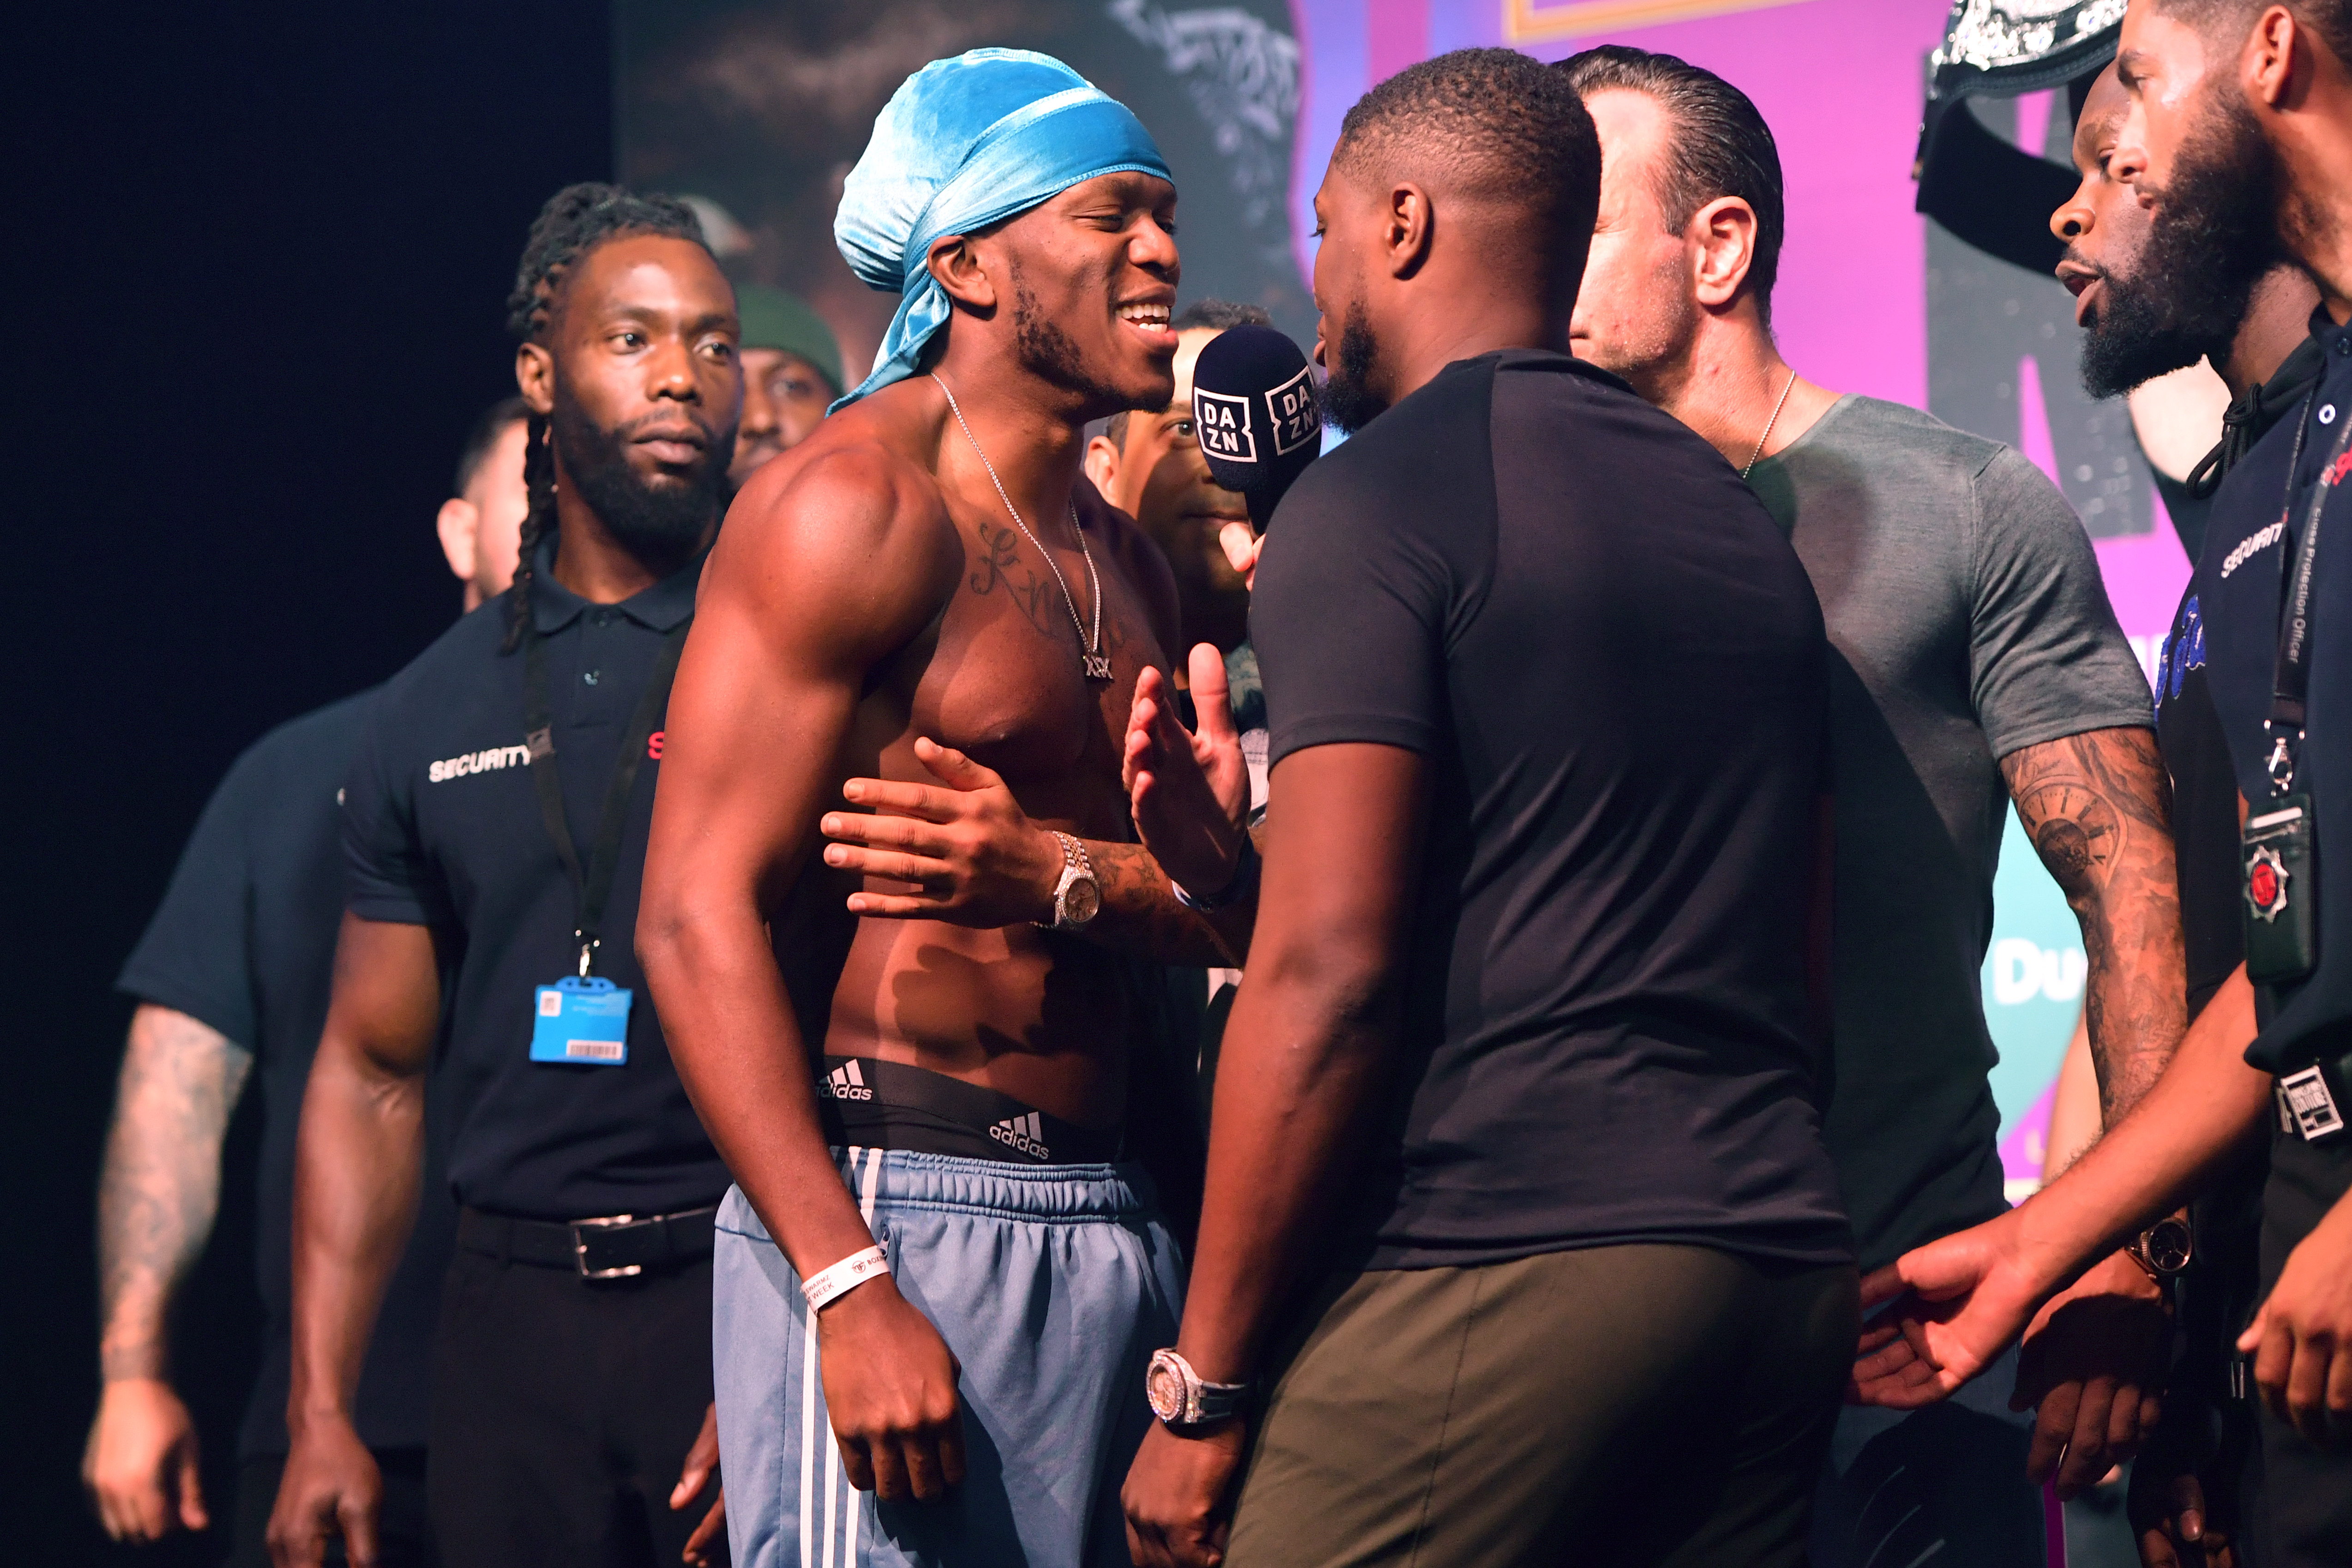 KSI faces Swarmz in a boxing match today in London